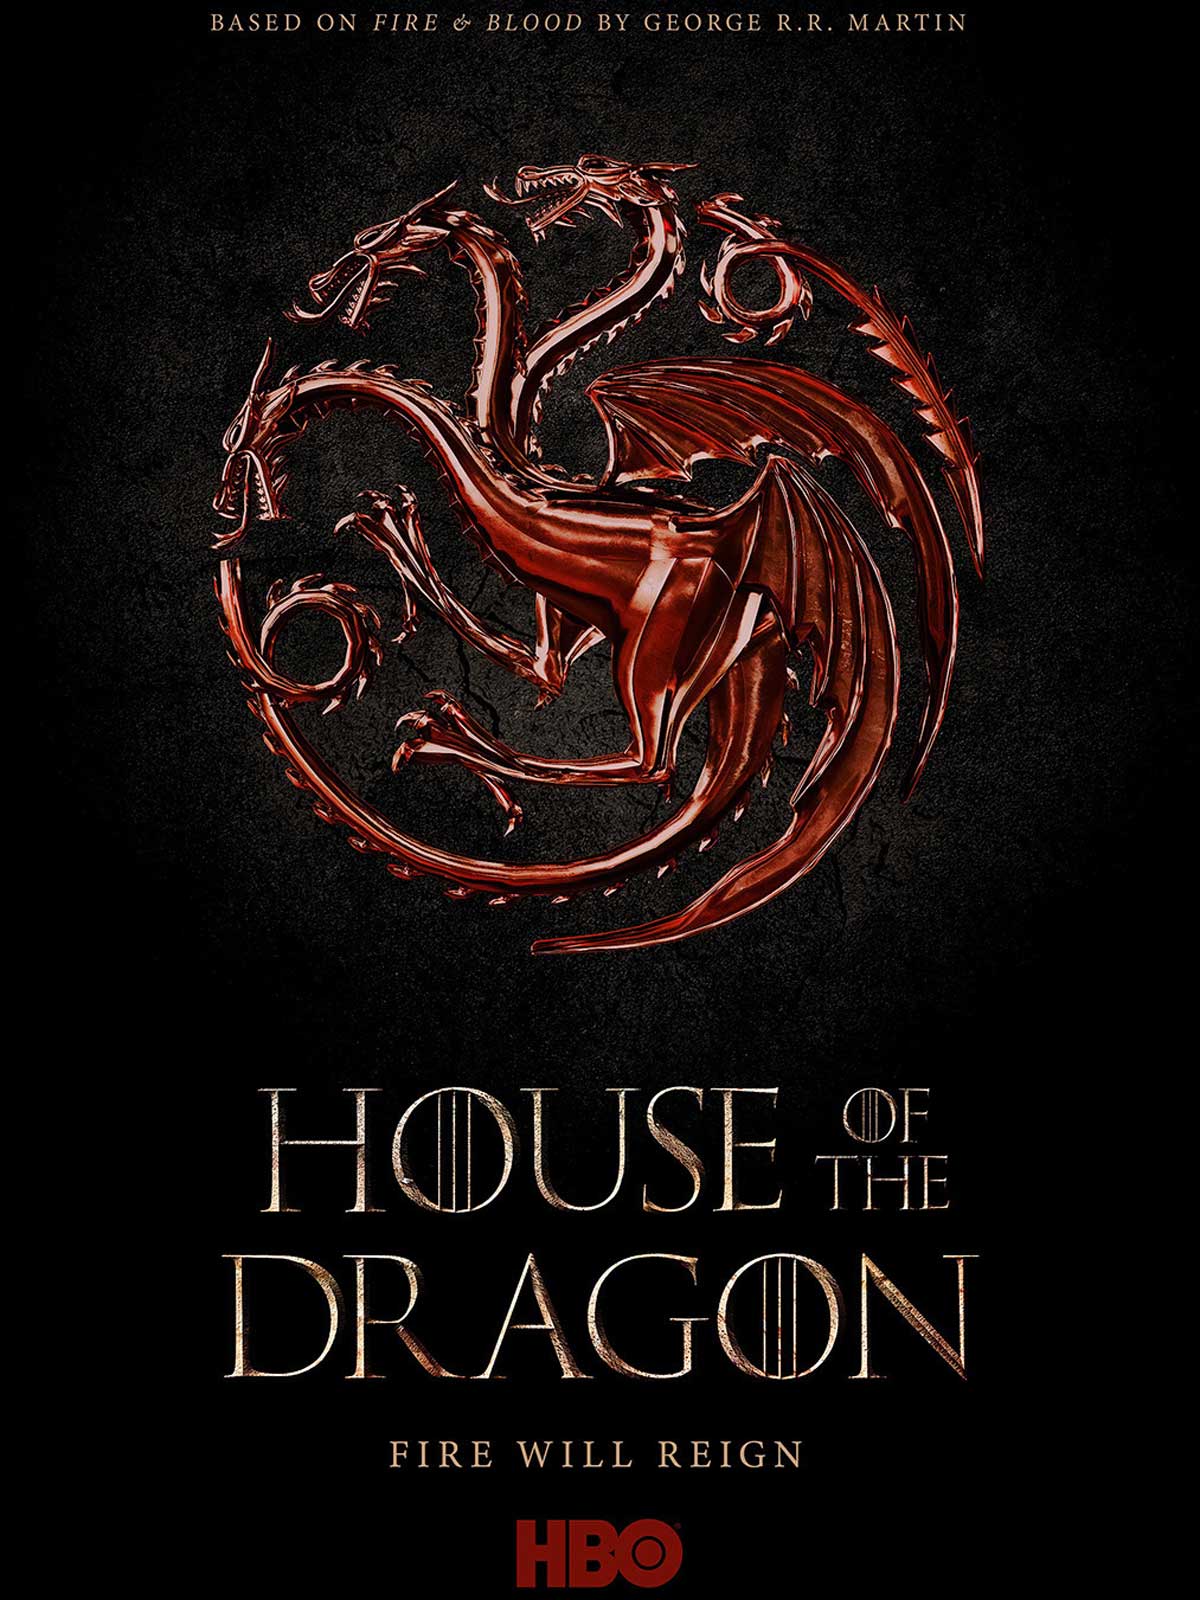 House-of-the-Dragon-george-rr-martin-game-of-thrones-prequel-targaryen-series-attendues-2022-fnac